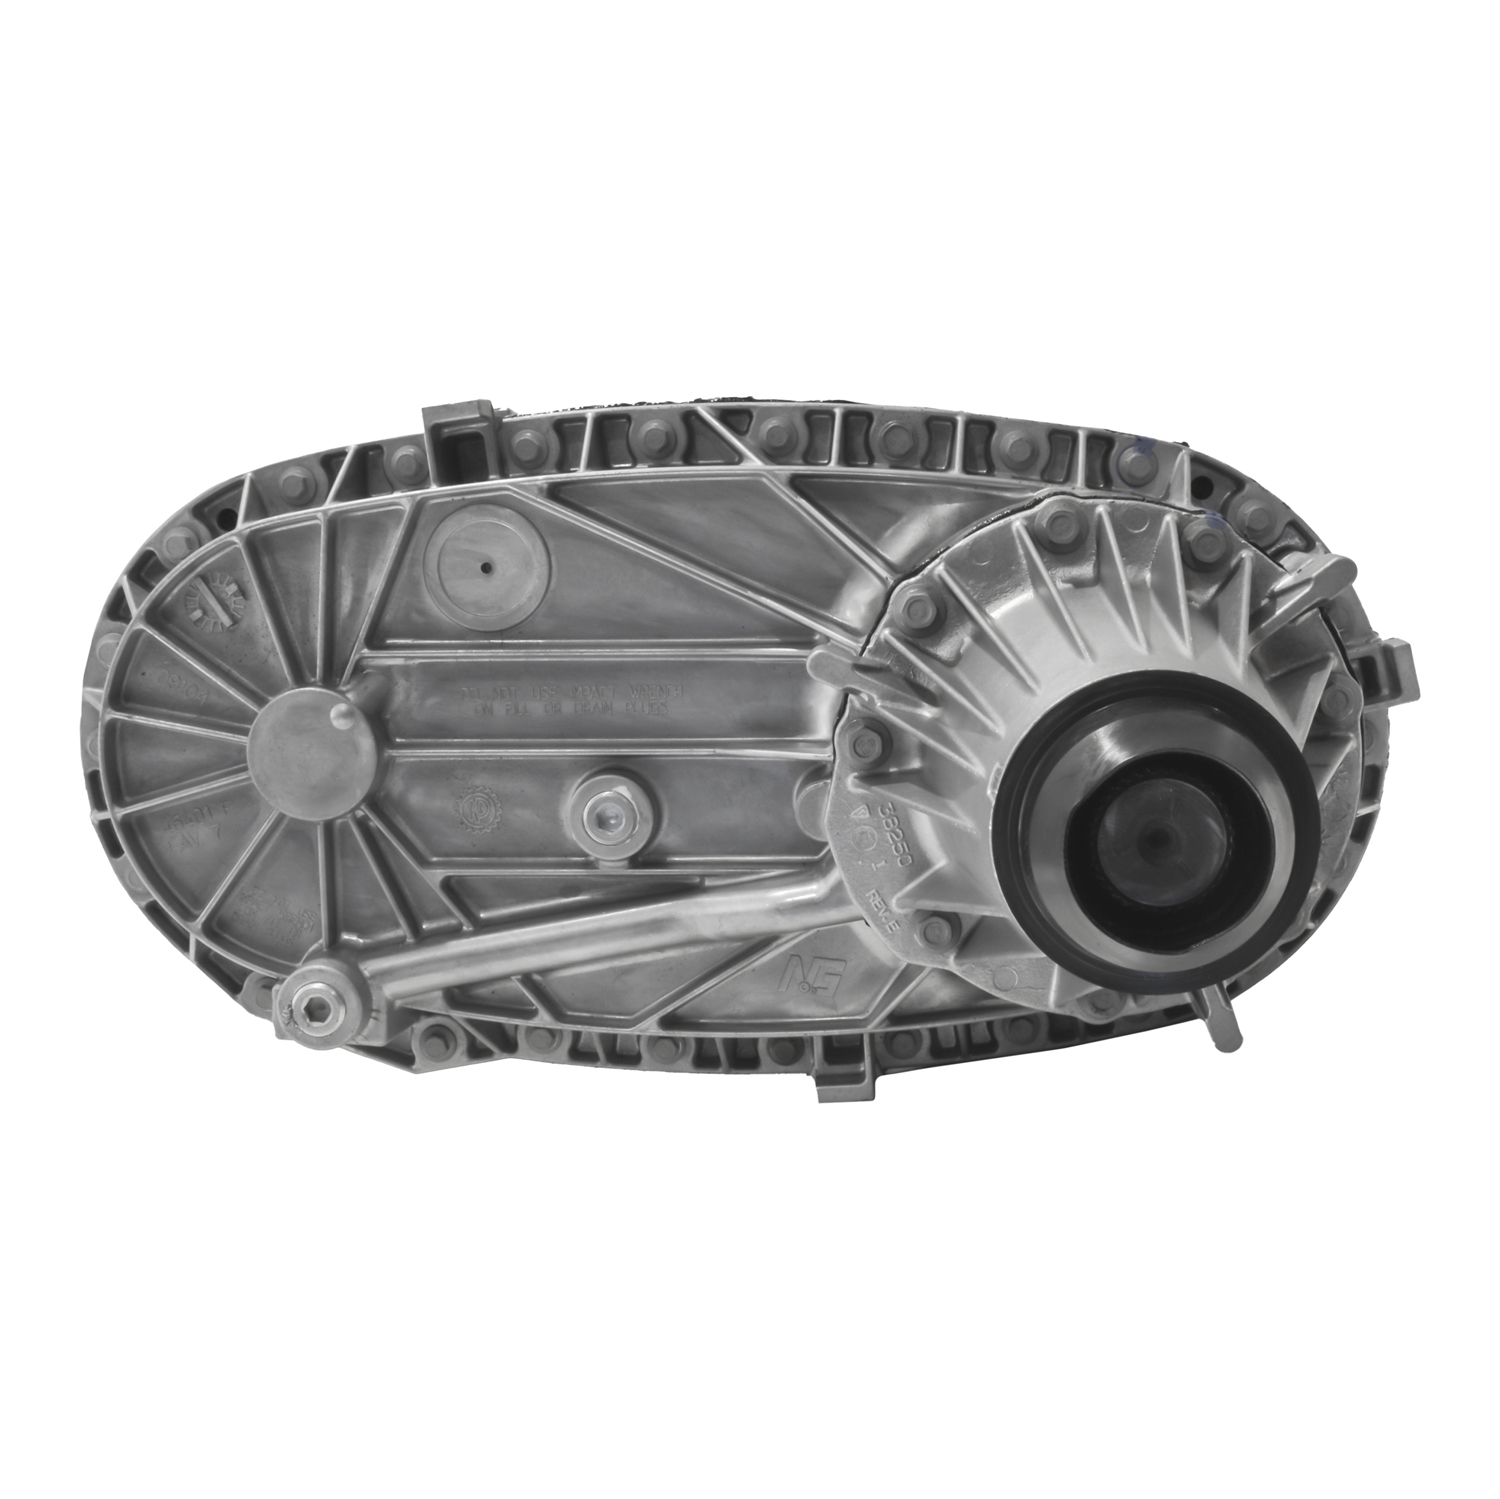 Zumbrota Remanufactured NP271 Transfer Case for 2003-2011 Ram 2500/3500 Series